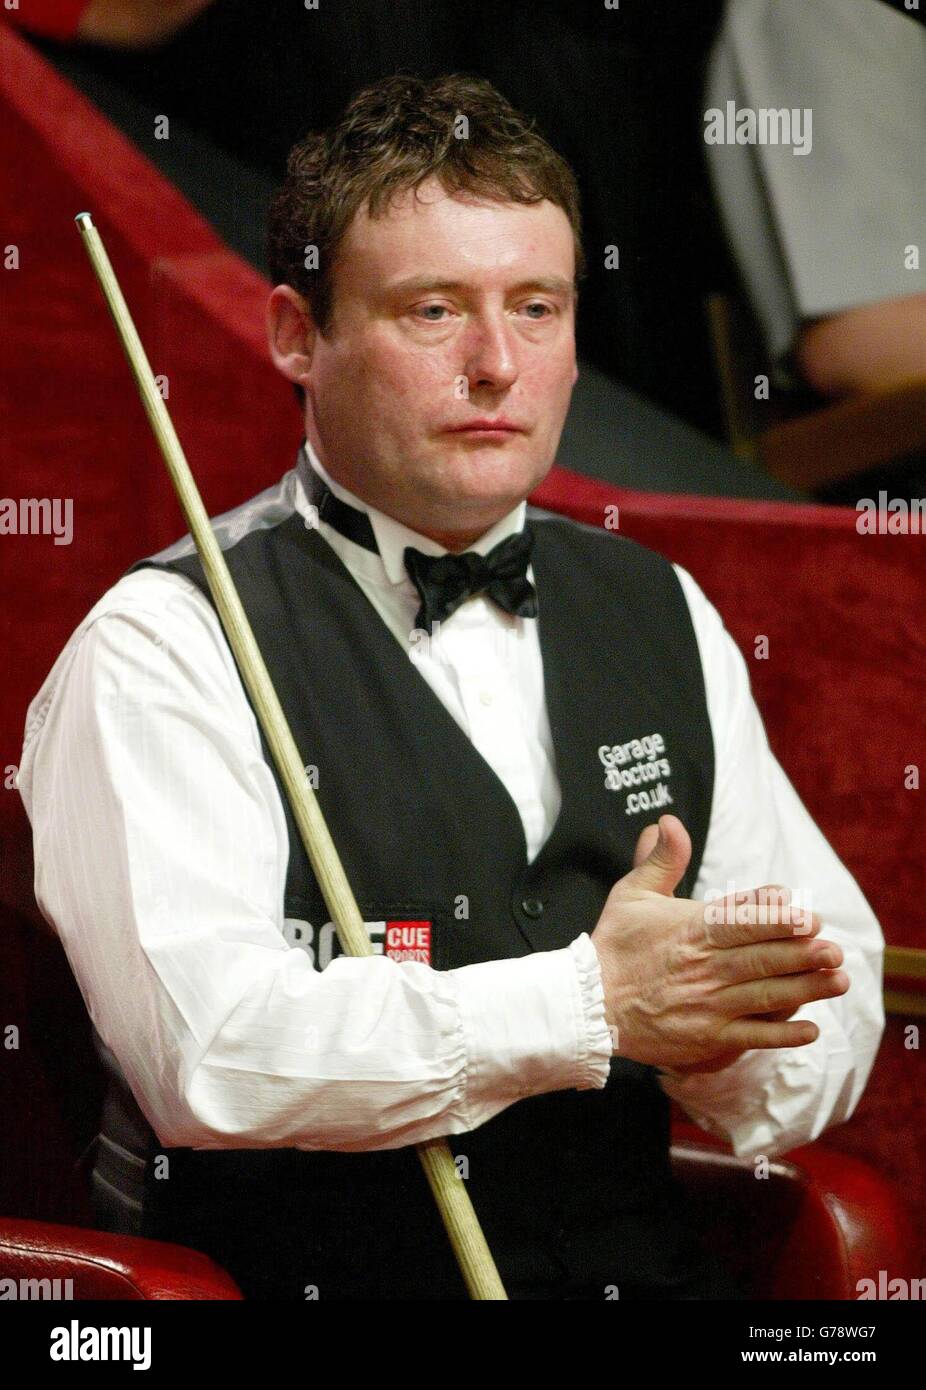 England's Jimmy White during the Embassy World Snooker Championship second round match against fellow country man Stephen Lee at the Crucible Theatre, Sheffield. 17/03/04: Jimmy White who was questioned by police, on suspicion of possessing a class A drug. The 41-year-old was arrested at the Holiday Inn in Preston, Lancs, having been in the city to play an exhibition match at the Guildhall. He was questioned by Lancashire Police and released on police bail until April 21. 23/05/2004: Snooker star Jimmy White who was recovering in an Irish hospital, Sunday May 23, 2004, after an emergency Stock Photo